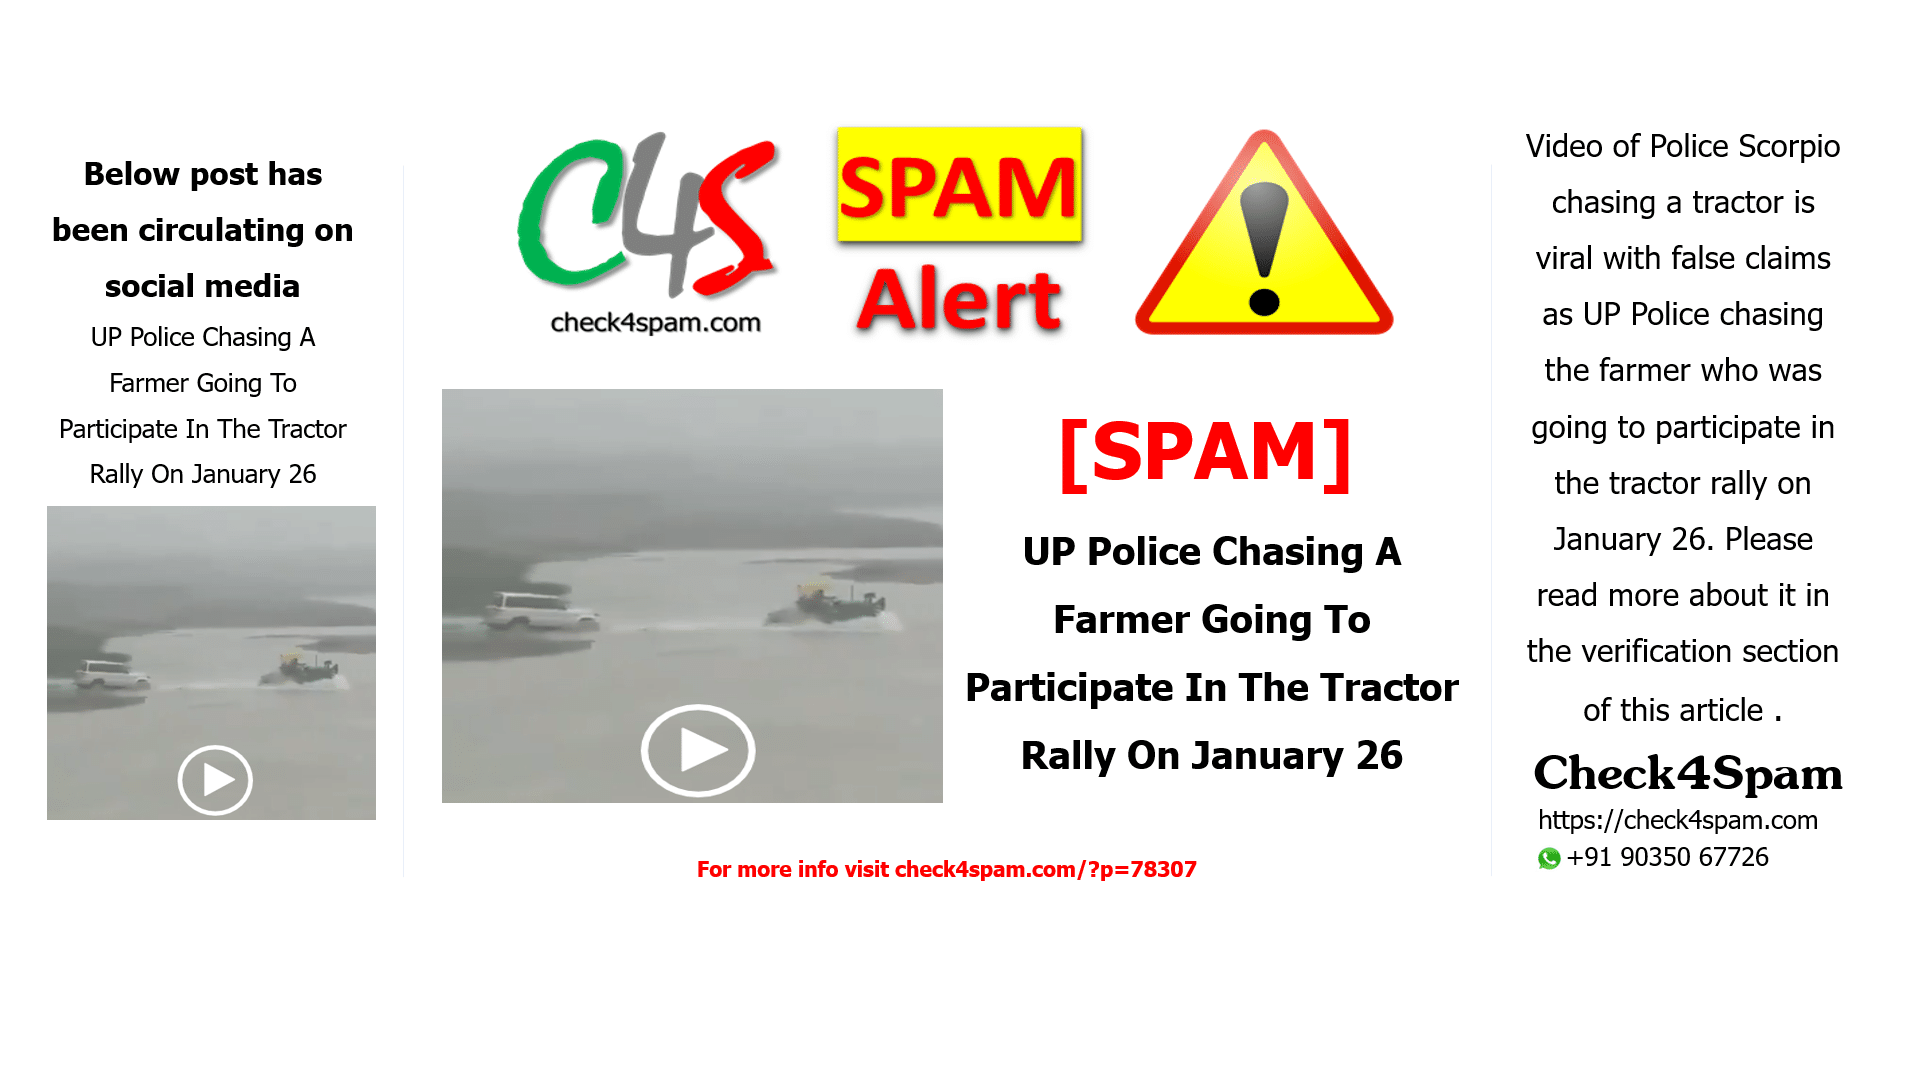 UP Police Chasing A Farmer Going To Participate In The Tractor Rally On January 26